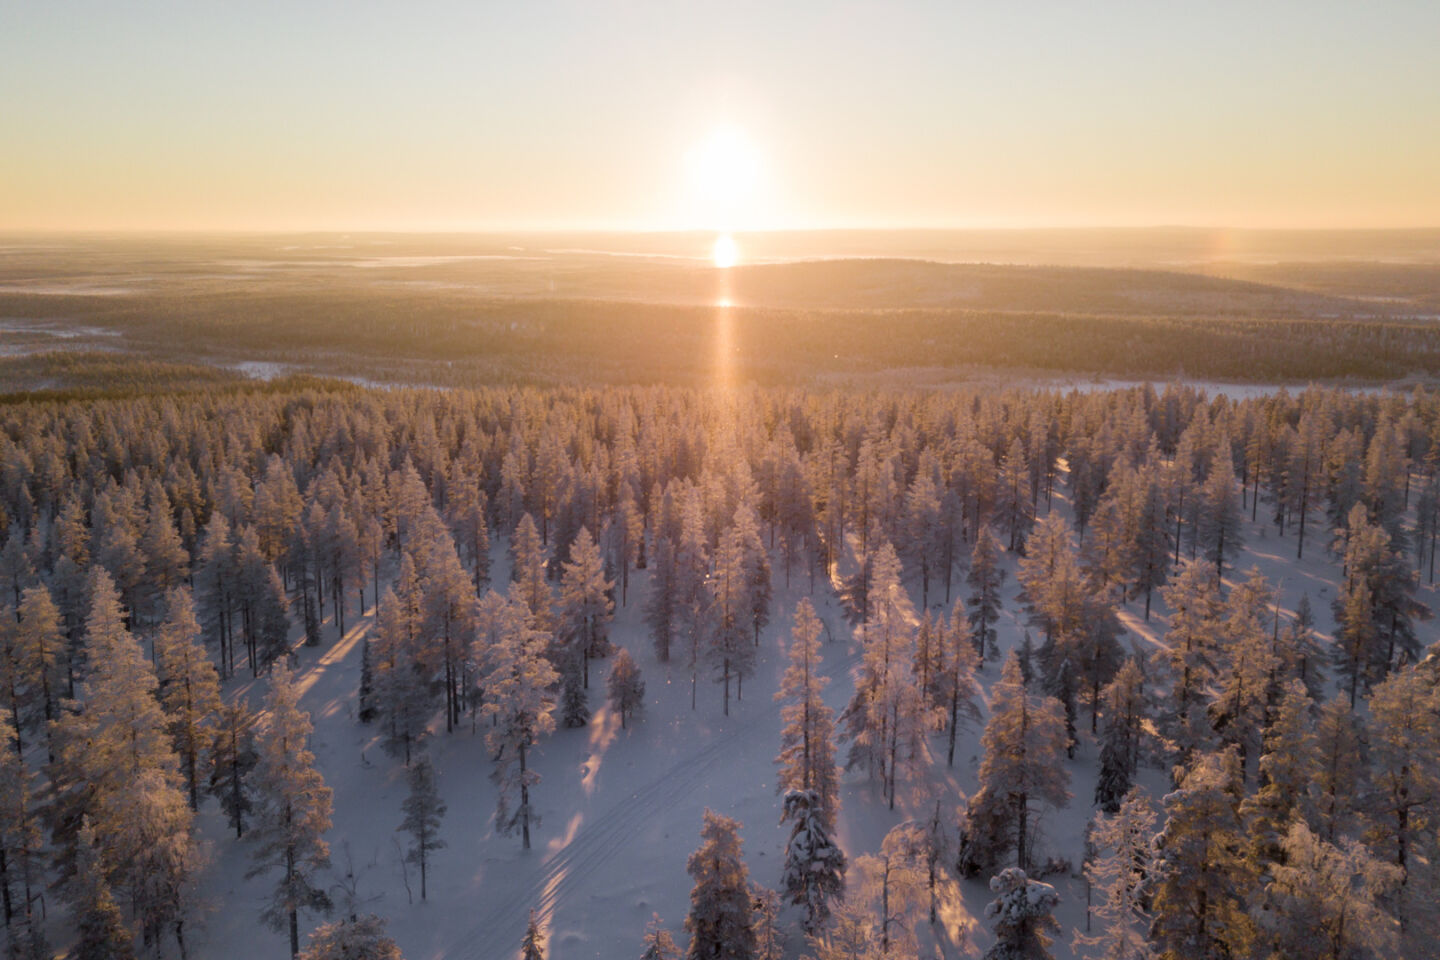 Breathing the cleanest air in the world, just one of the many reasons to work in Lapland in the winter